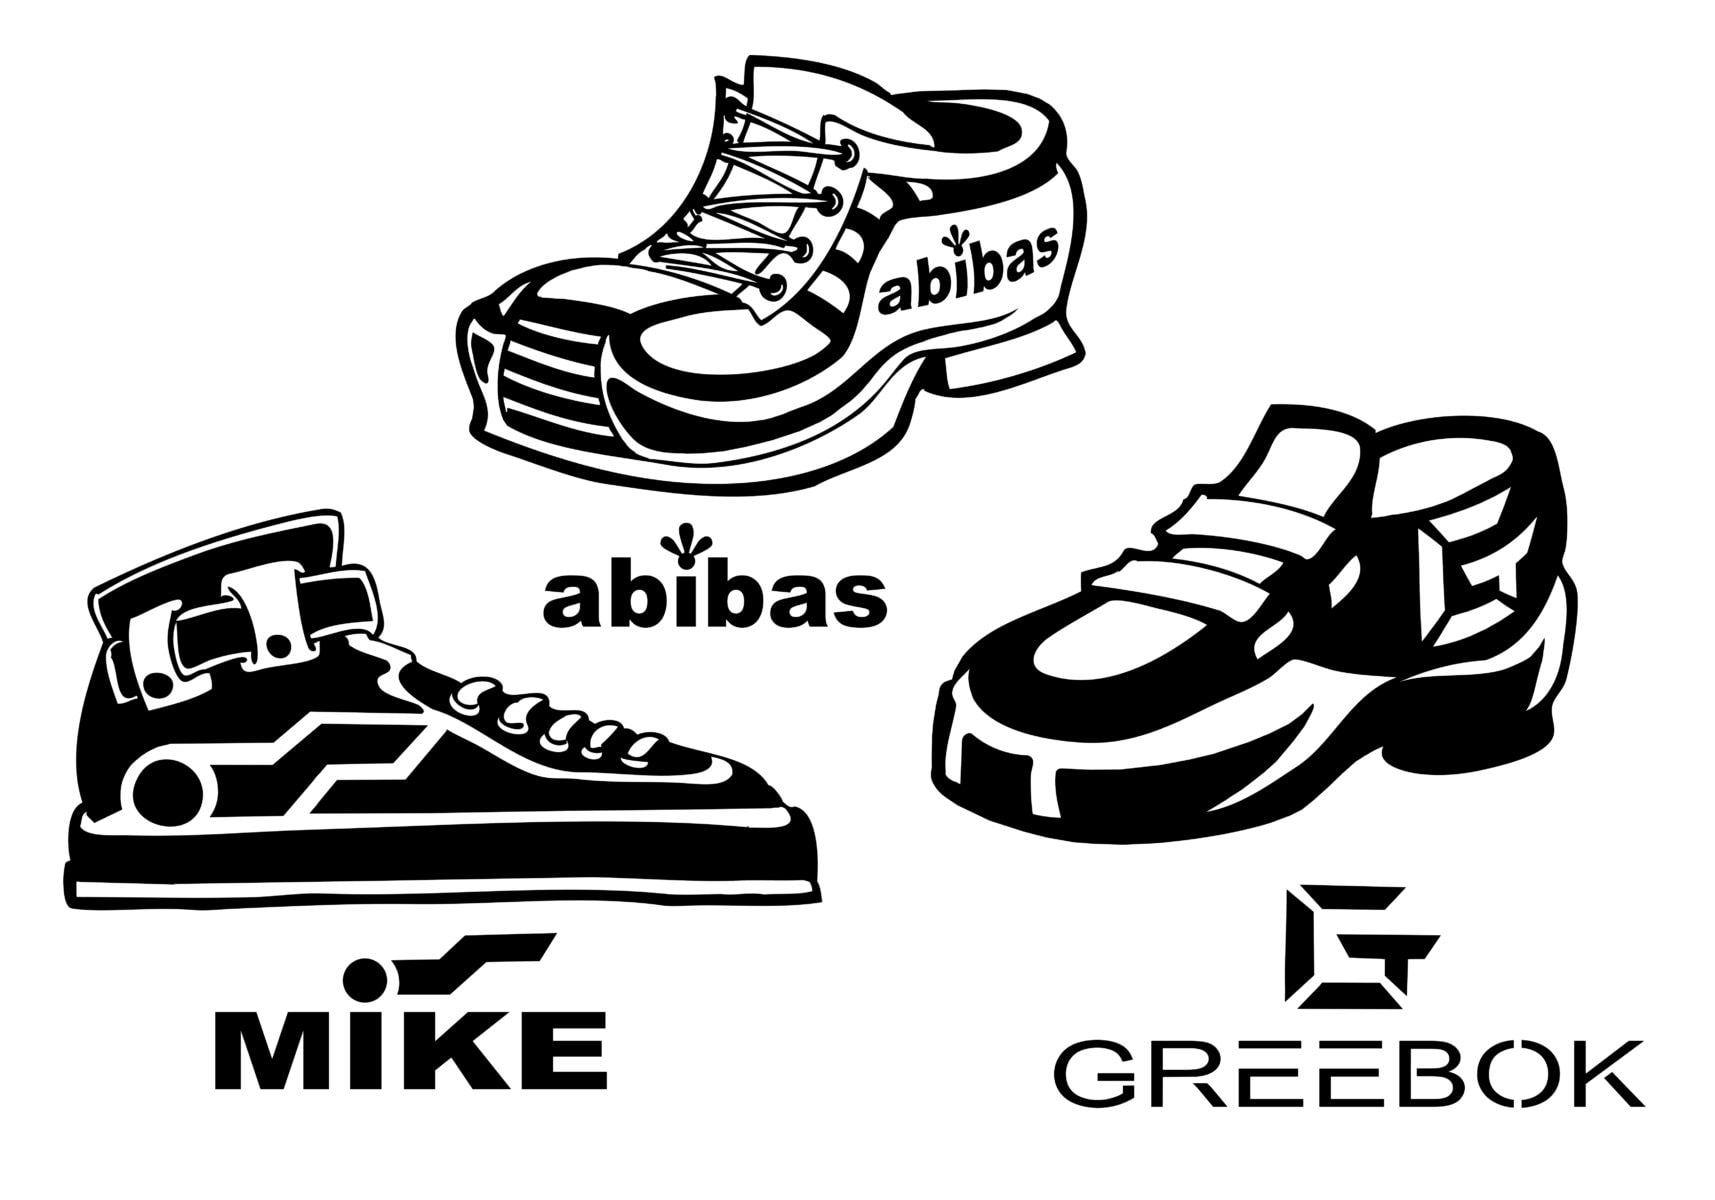 Illustration of the shoe brands - Abibas, Greebok, Mike - we will let you be the judge of if they are unlawfully similar.